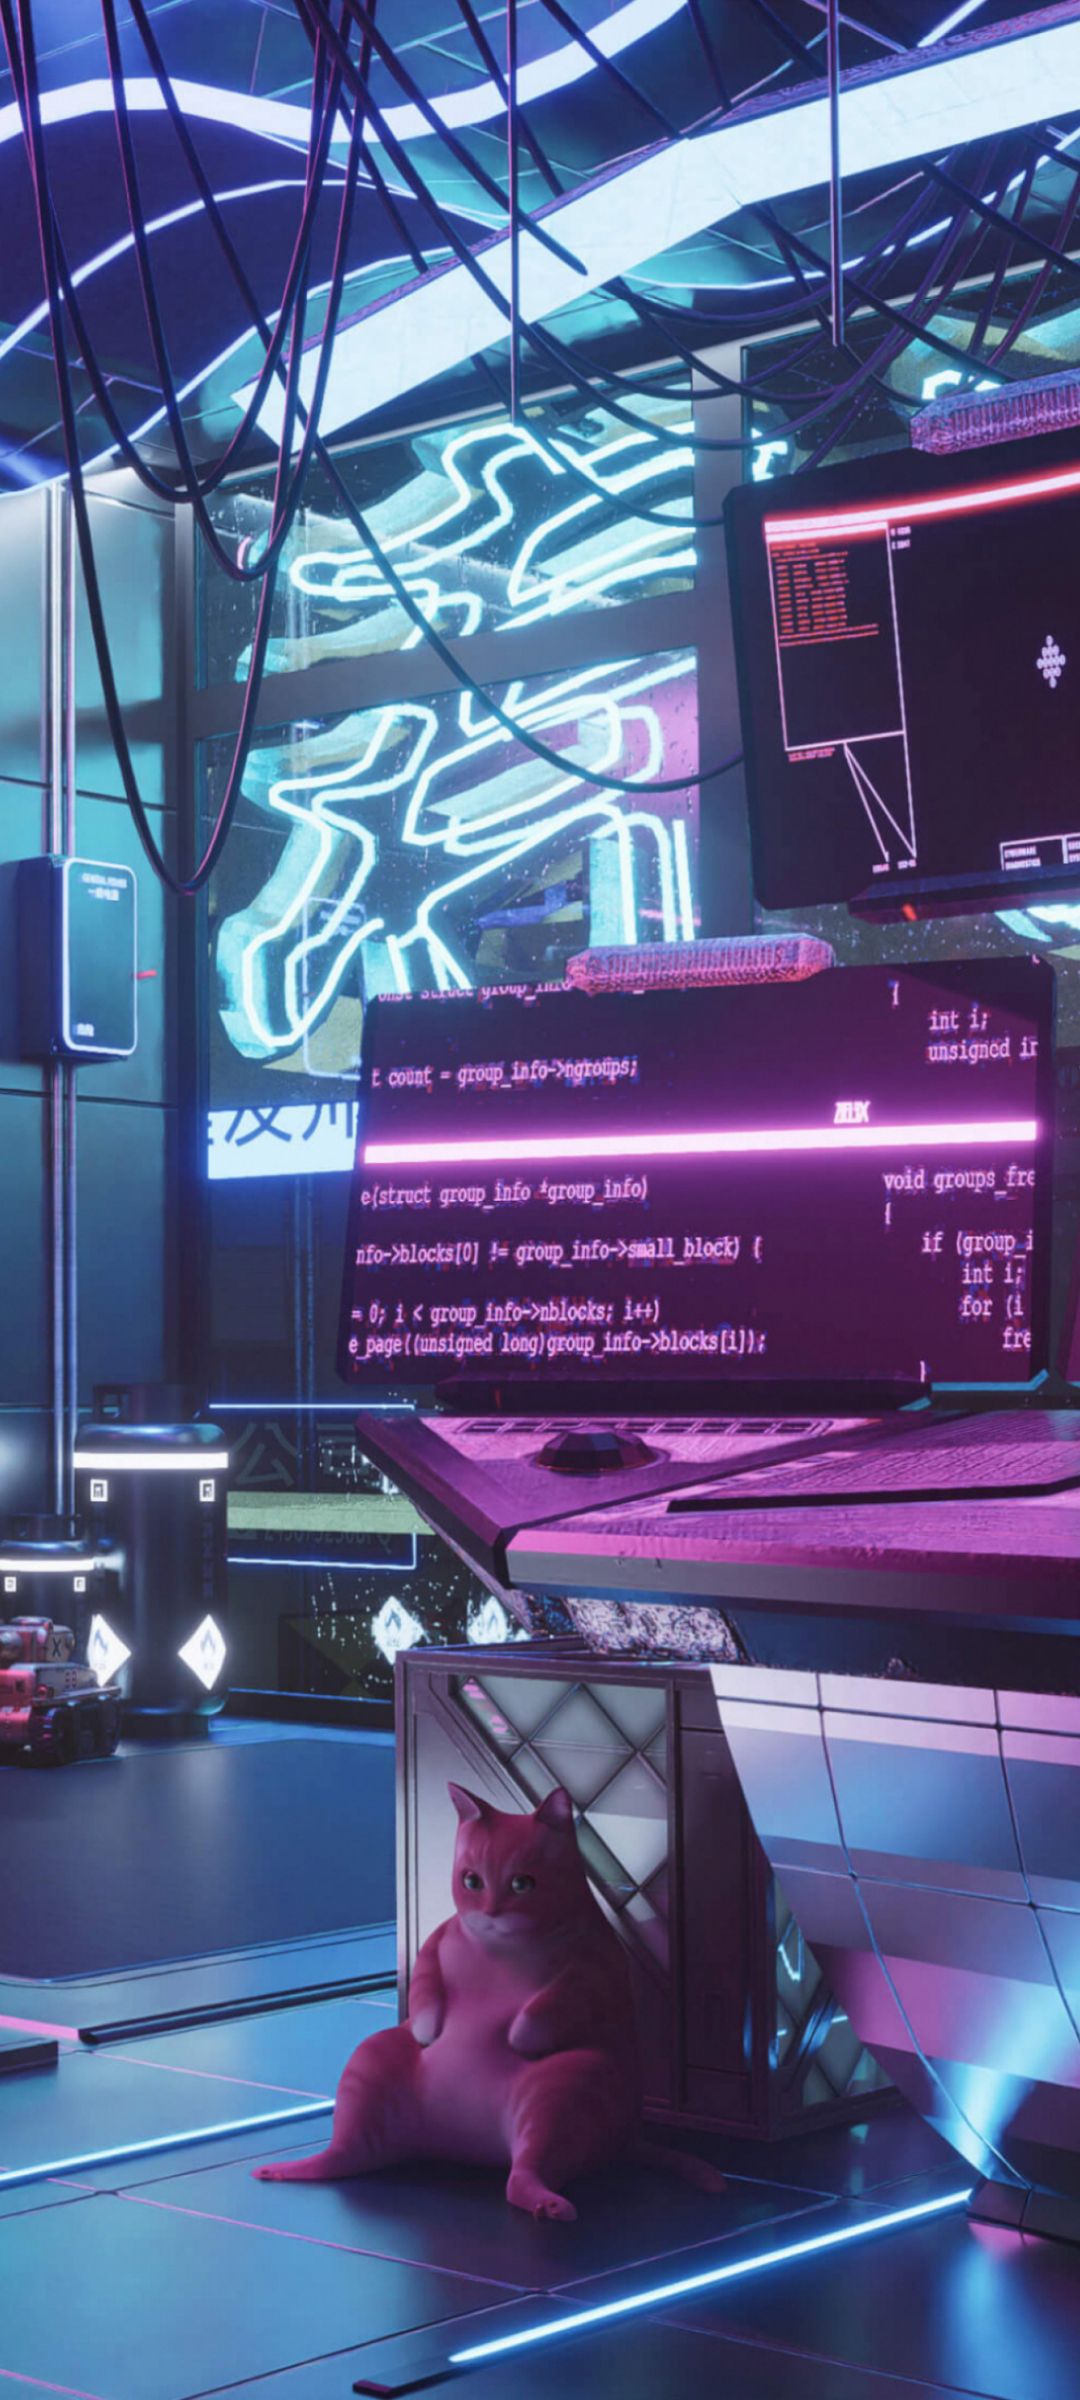 Aesthetic cyberpunk room with a cat and a code - Cyberpunk